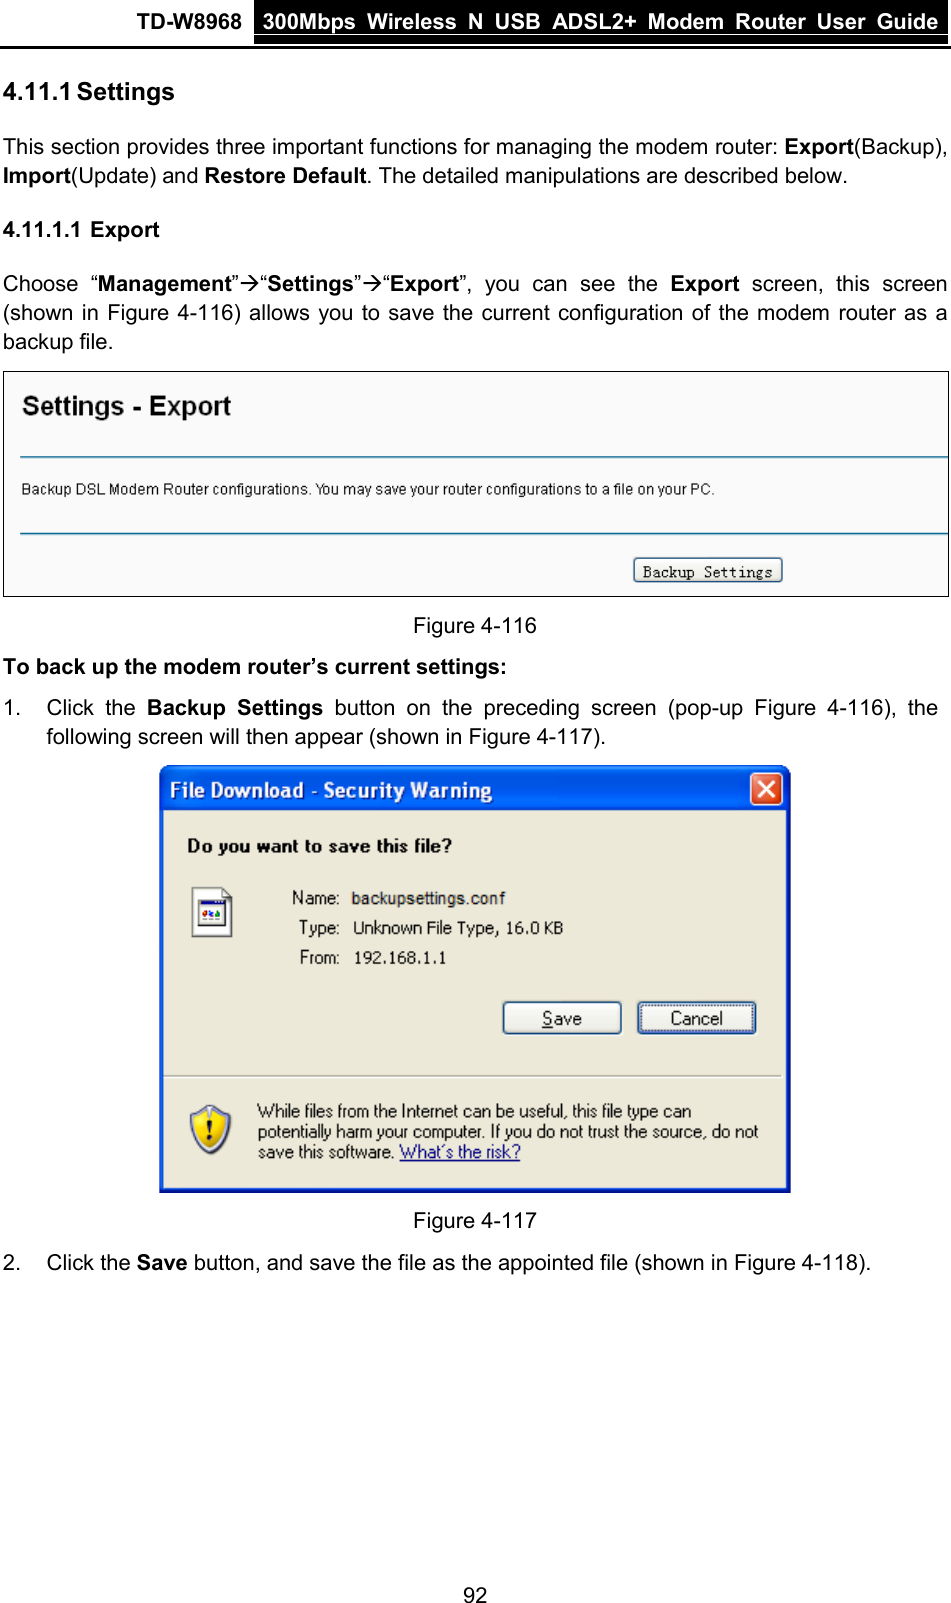 TD-W8968 300Mbps Wireless  N  USB ADSL2+ Modem Router  User Guide  4.11.1 Settings This section provides three important functions for managing the modem router: Export(Backup), Import(Update) and Restore Default. The detailed manipulations are described below. 4.11.1.1 Export Choose “Management”“Settings”“Export”, you can see the Export screen, this screen (shown in Figure 4-116) allows you to save the current configuration of the modem router as a backup file.  Figure 4-116 To back up the modem router’s current settings: 1. Click the Backup Settings  button  on the preceding screen (pop-up  Figure  4-116),  the following screen will then appear (shown in Figure 4-117).  Figure 4-117 2. Click the Save button, and save the file as the appointed file (shown in Figure 4-118). 92 